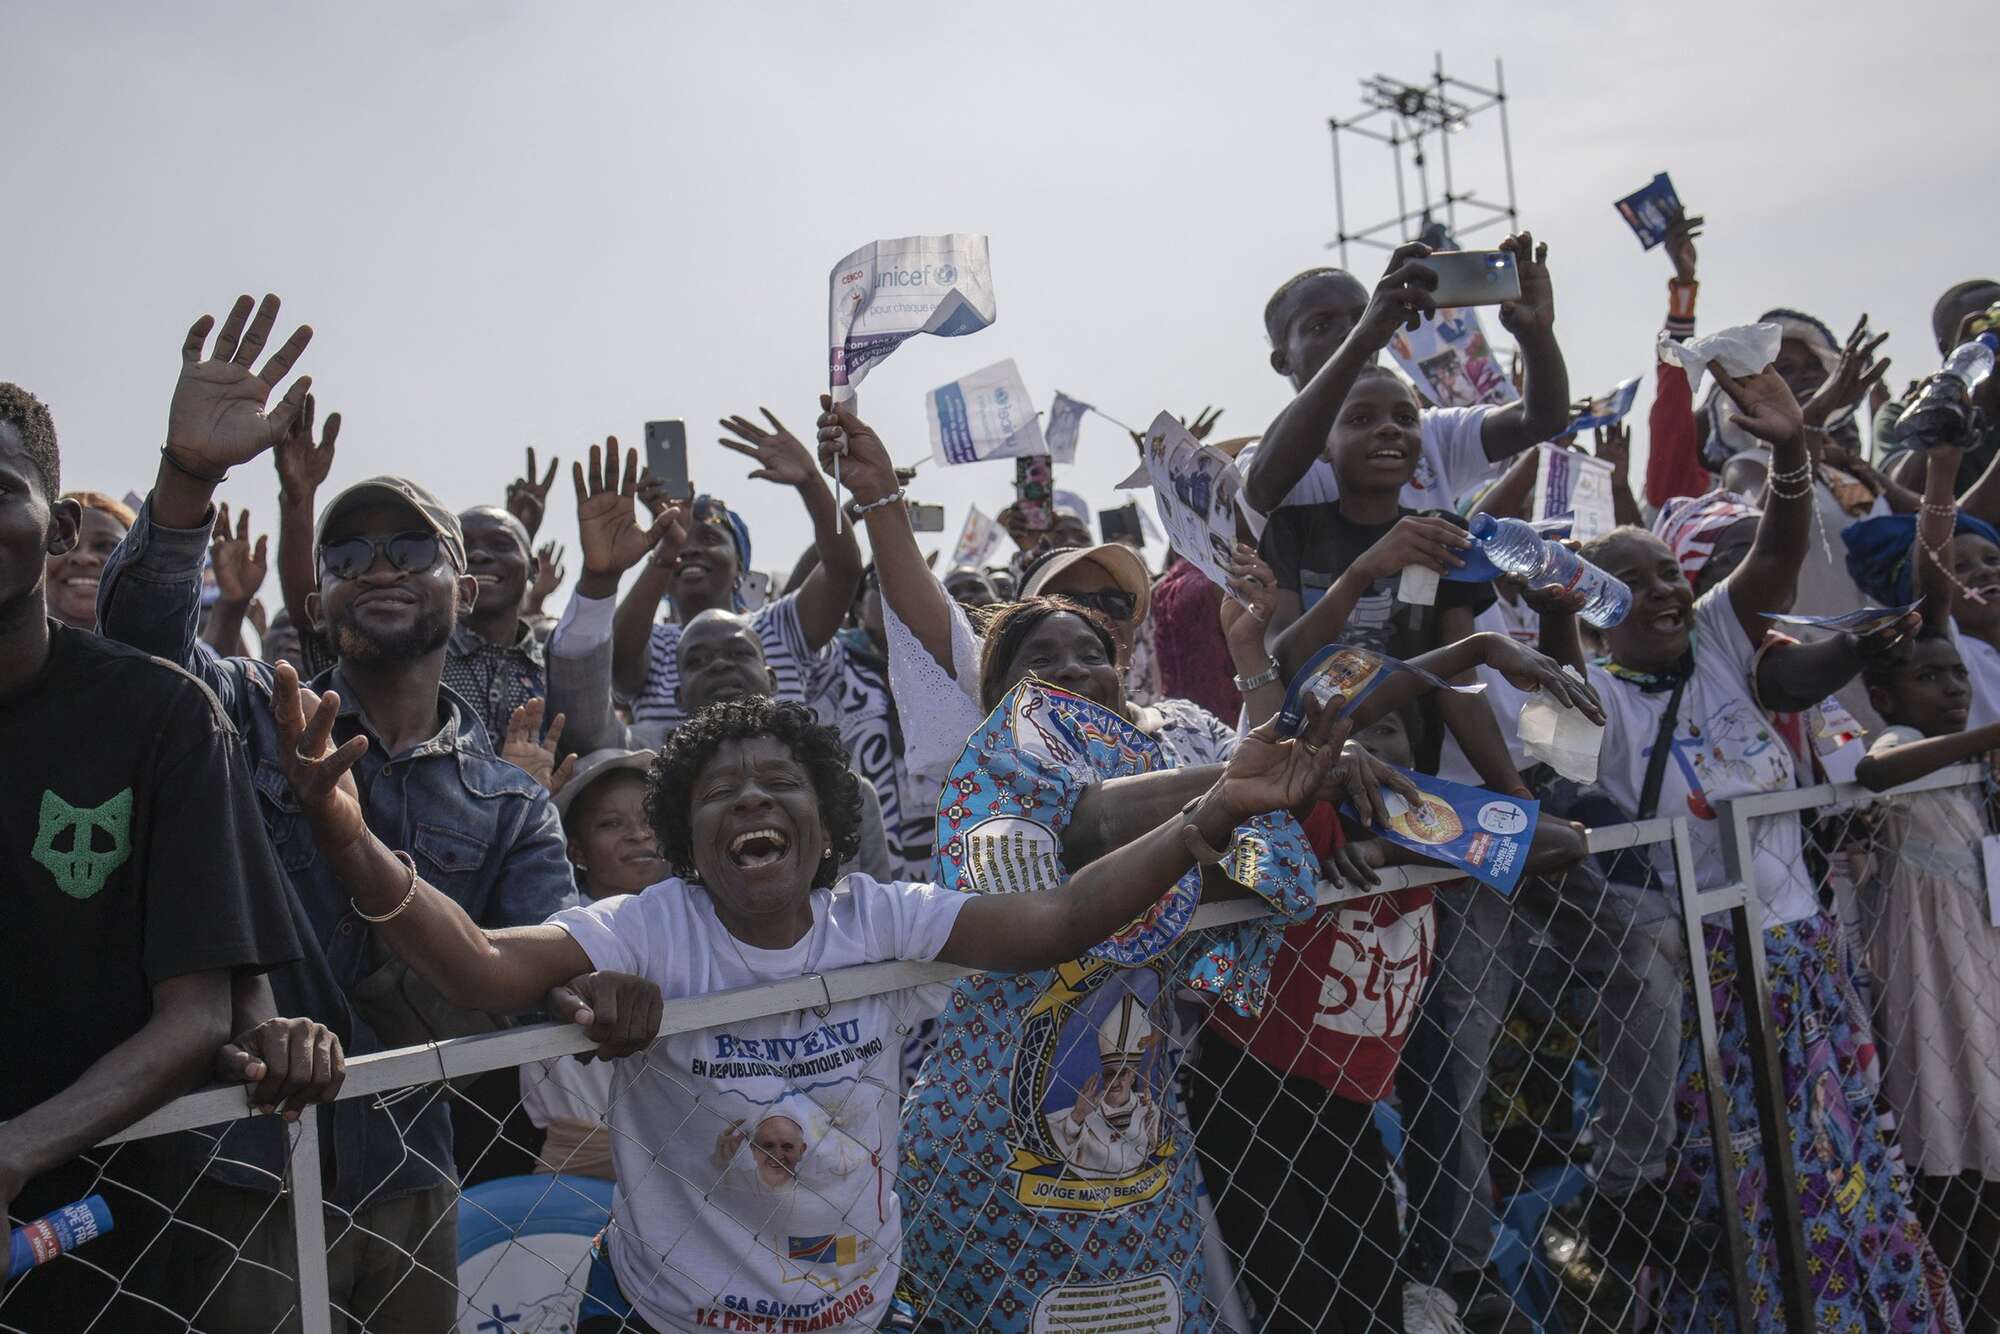 Dreaming of peace, DR Congo faithful flock to see Pope Francis